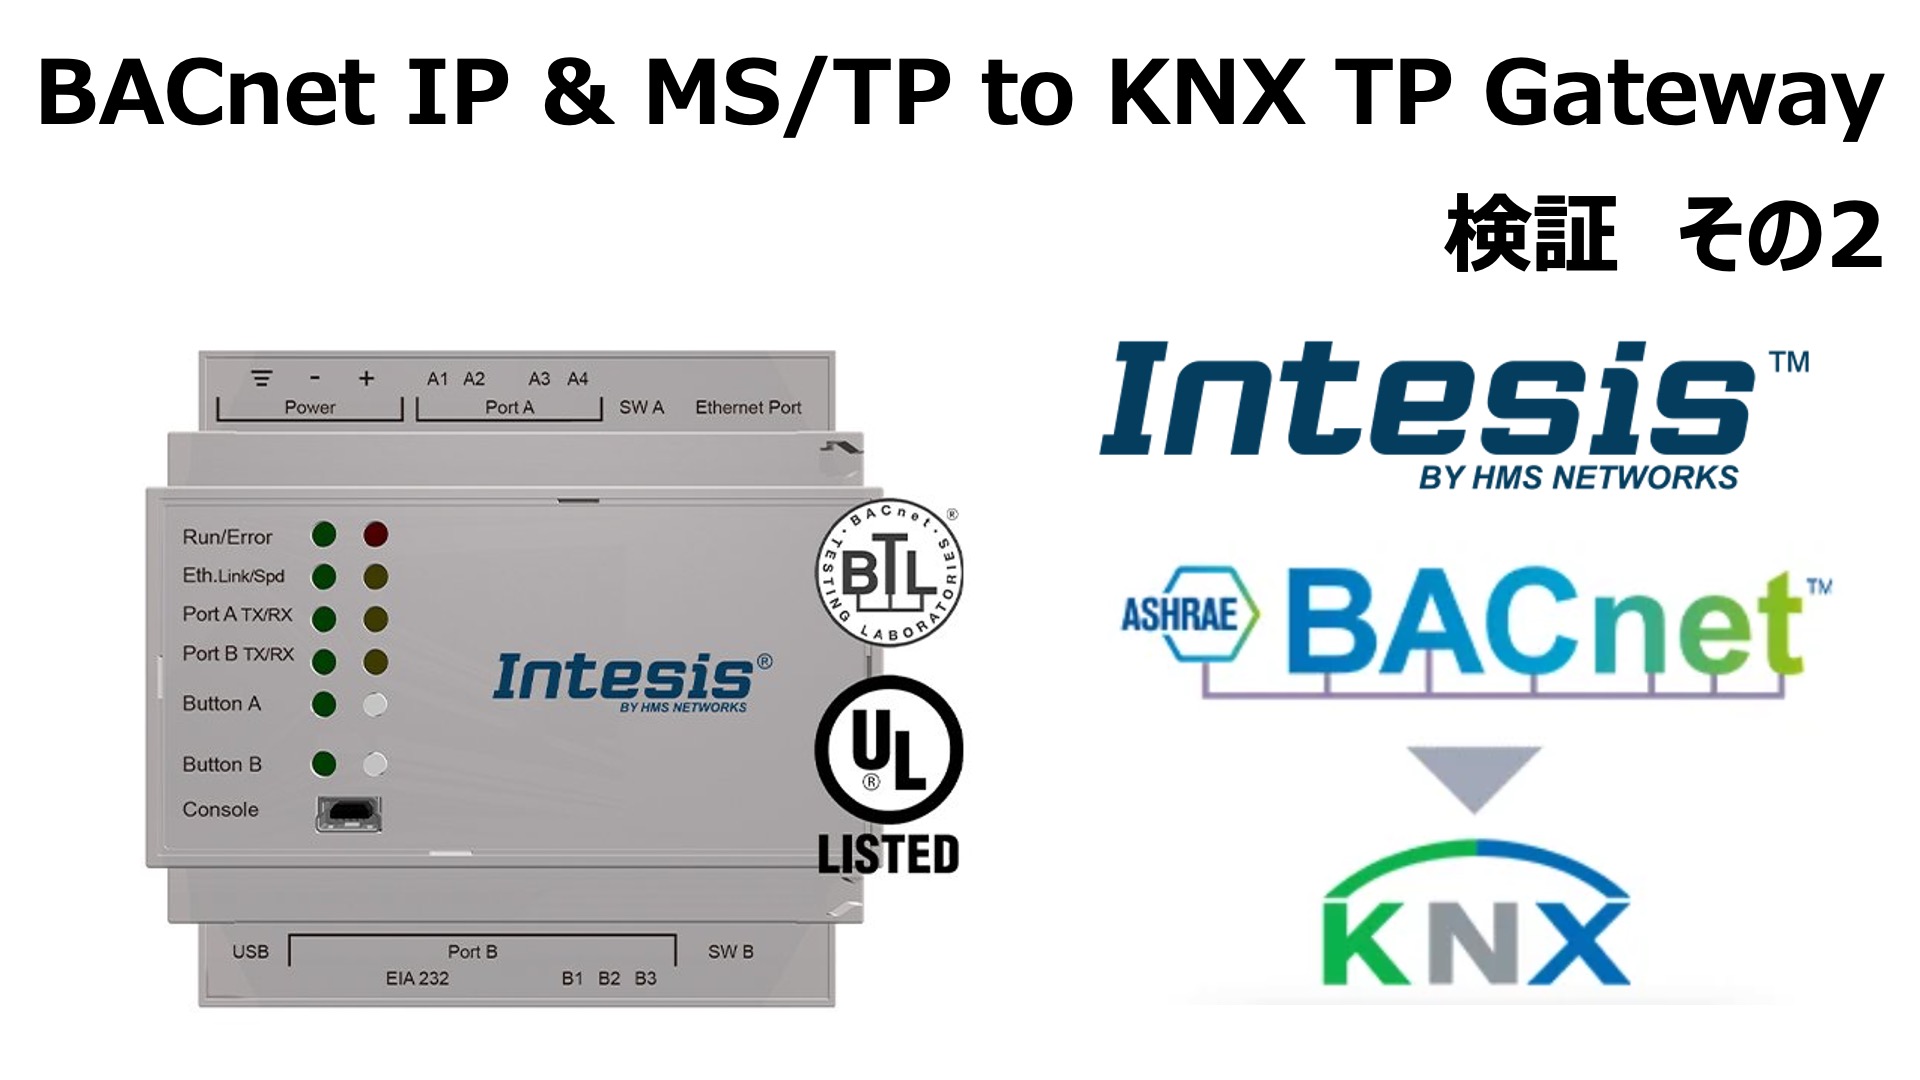 BACnet IP & MS/TP Client to KNX TP Gateway